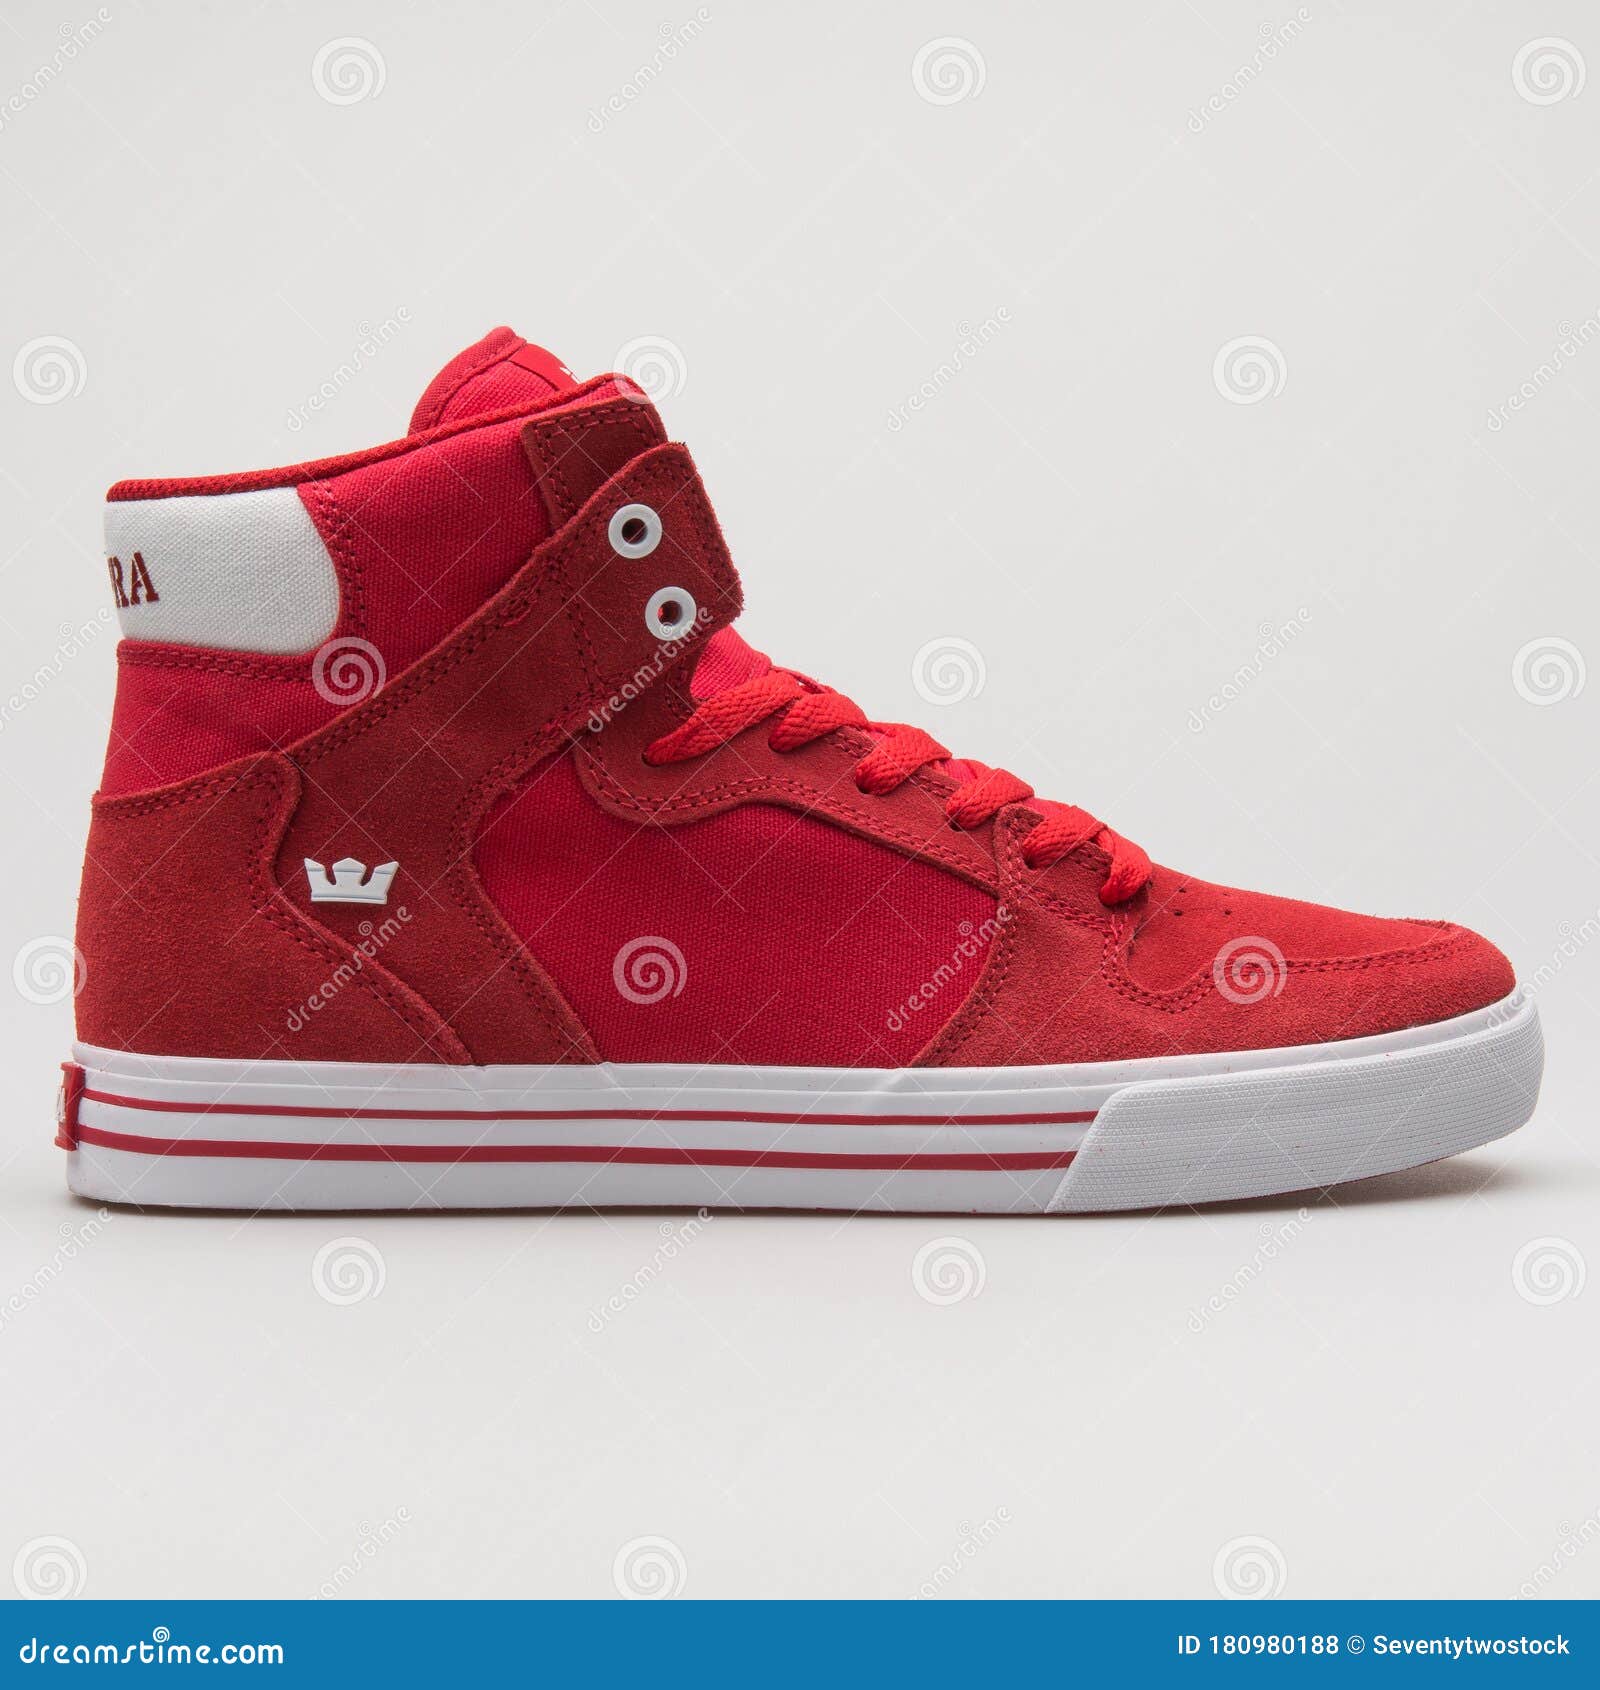 Supra Vaider Red and White Sneaker 